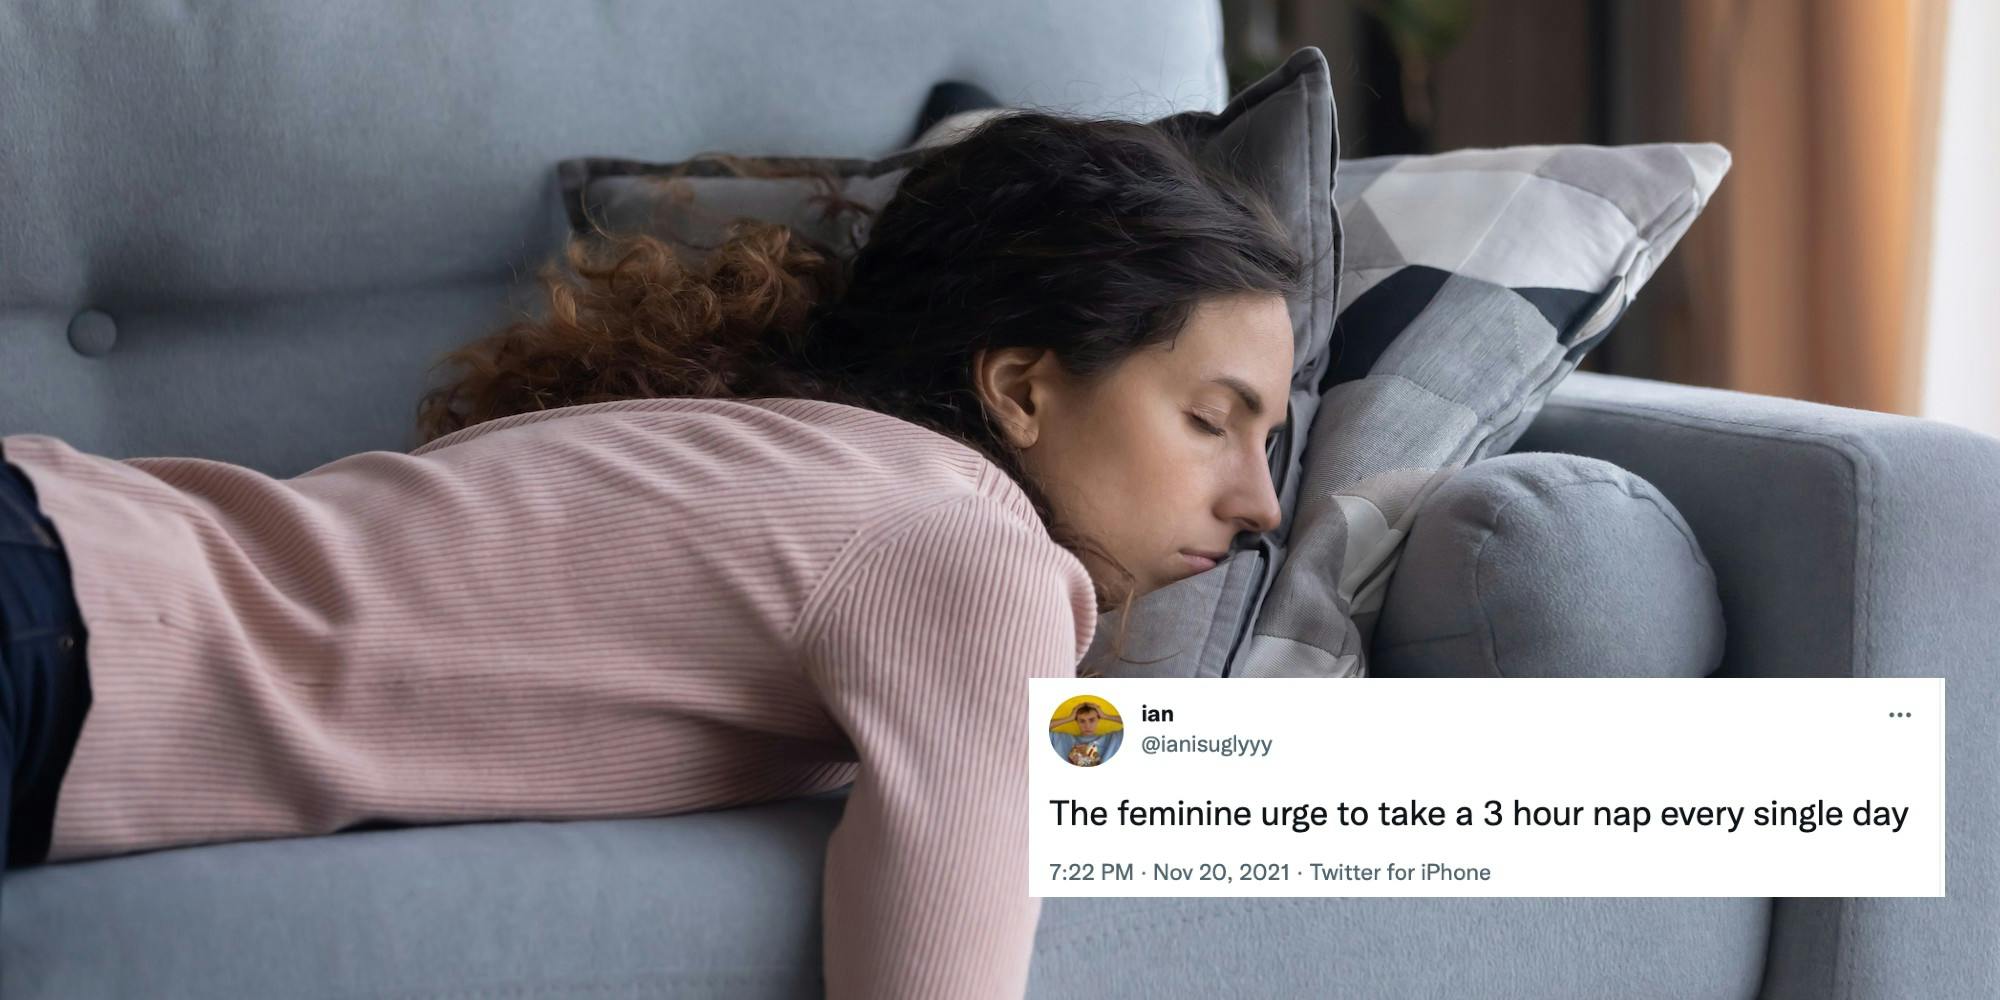 a photo of a woman napping next to a tweet about the feminine urge to nap.